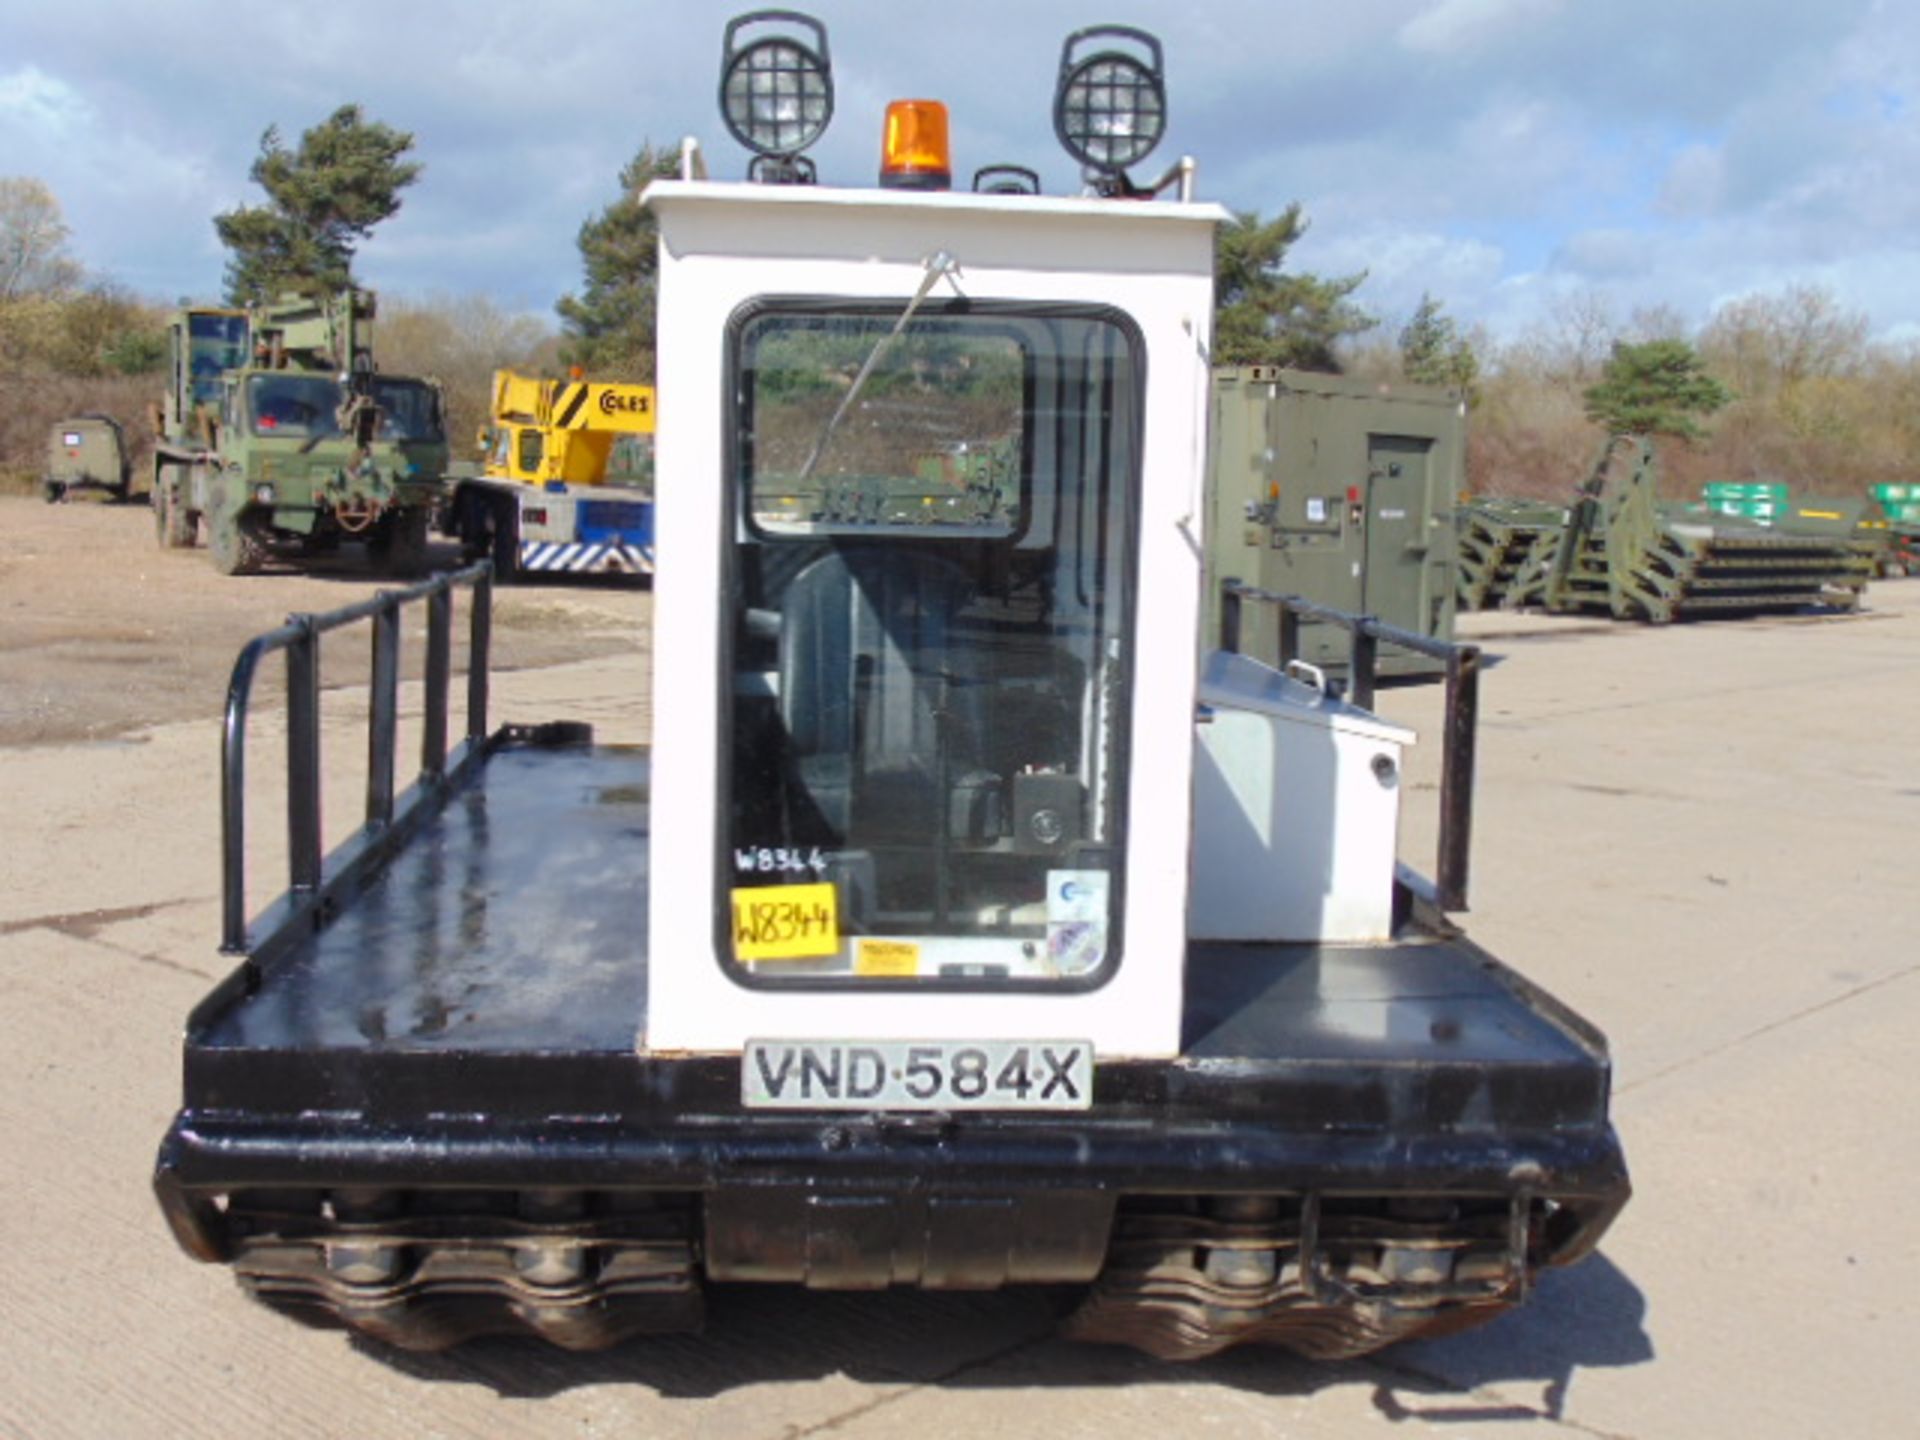 Rolba Bombardier Muskeg MM 80 All Terrain Tracked Vehicle with Rear Mounted Boughton Winch - Image 2 of 32